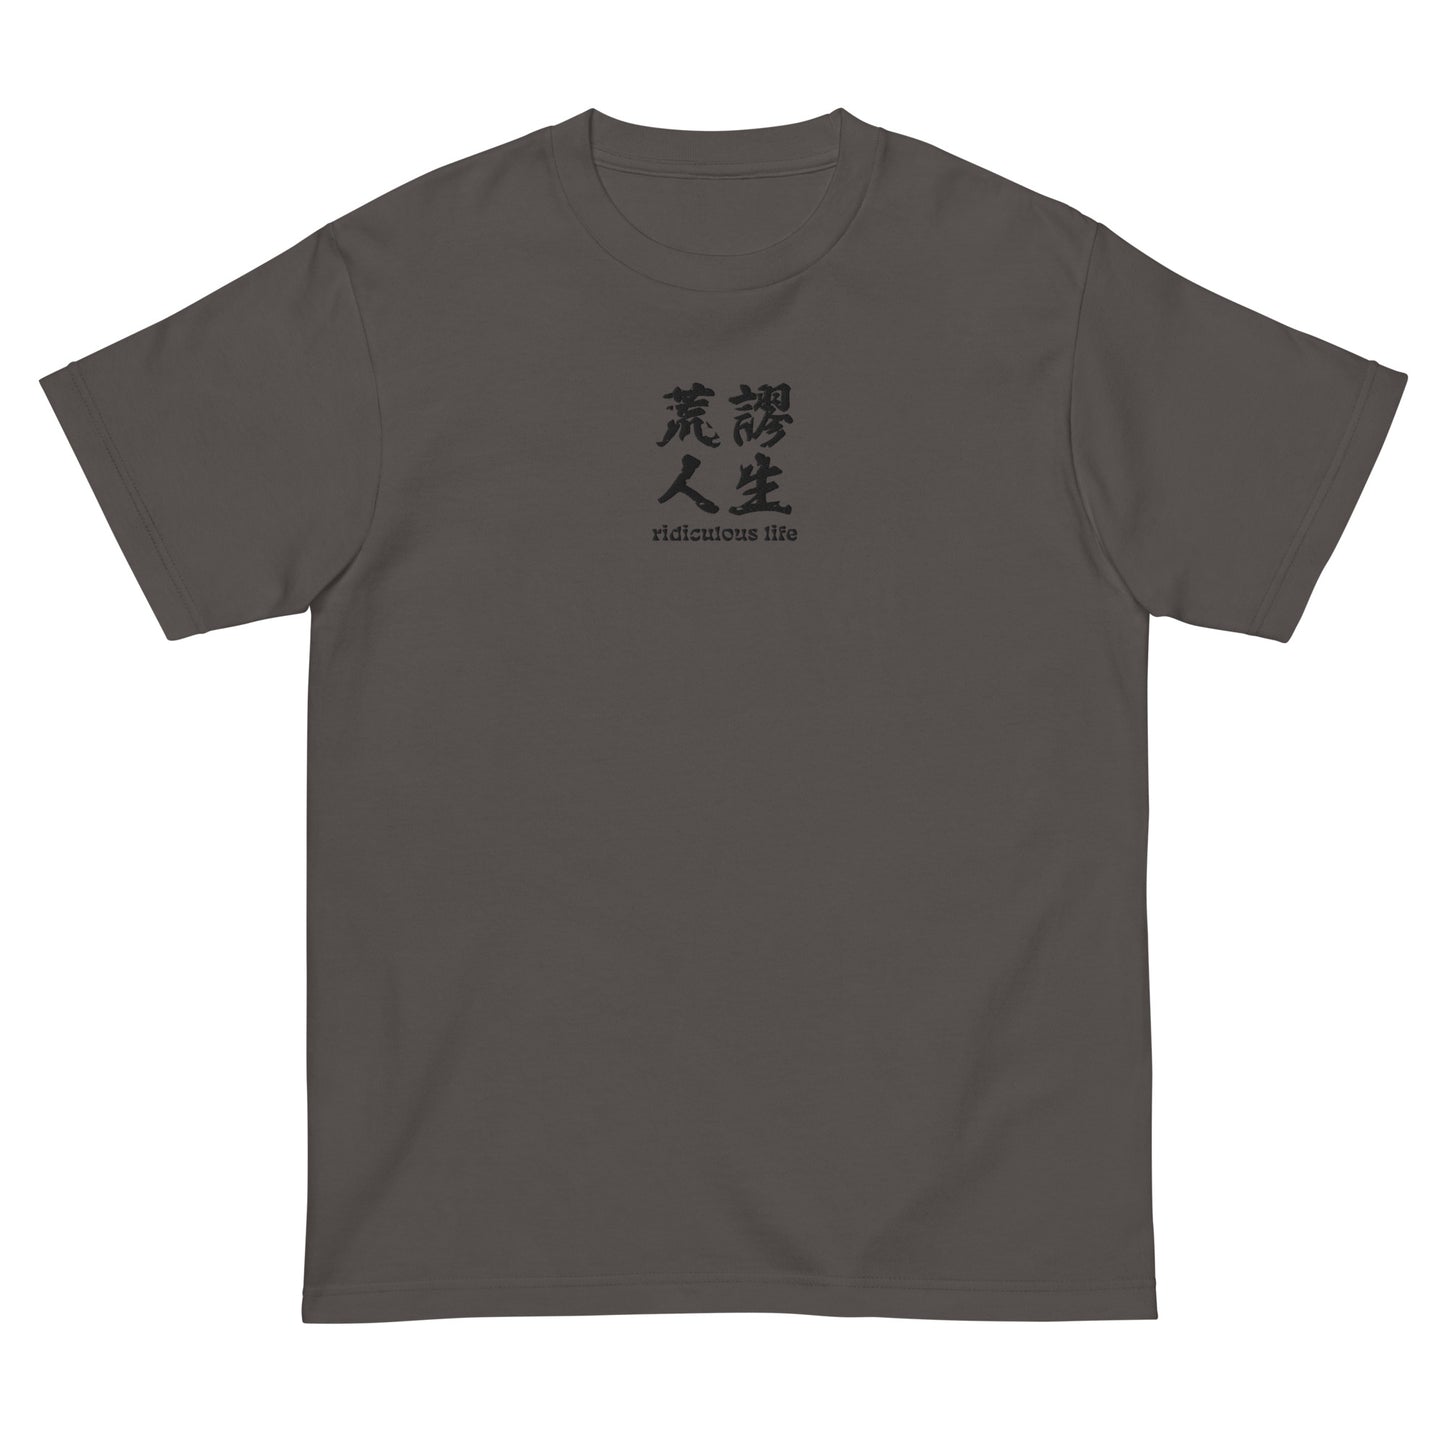 Dark Gray High Quality Tee - Front Design with an Black Embroidery "Ridiculous Life" in Chinese and English 